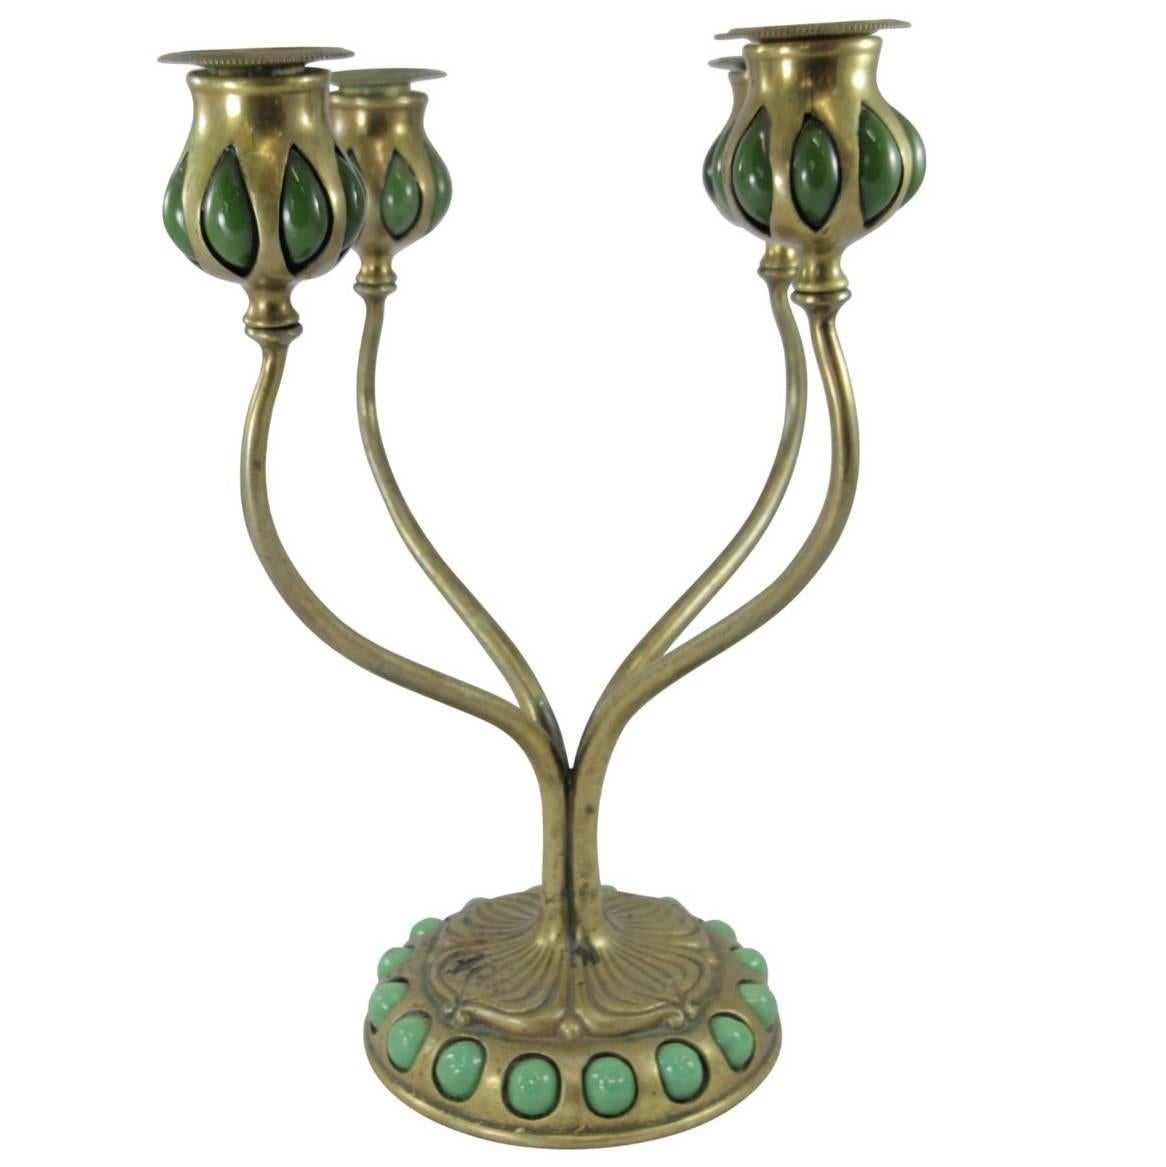 Tiffany Studios Art Glass and Gilt Bronze Candelabra in the Art Nouveau Style For Sale